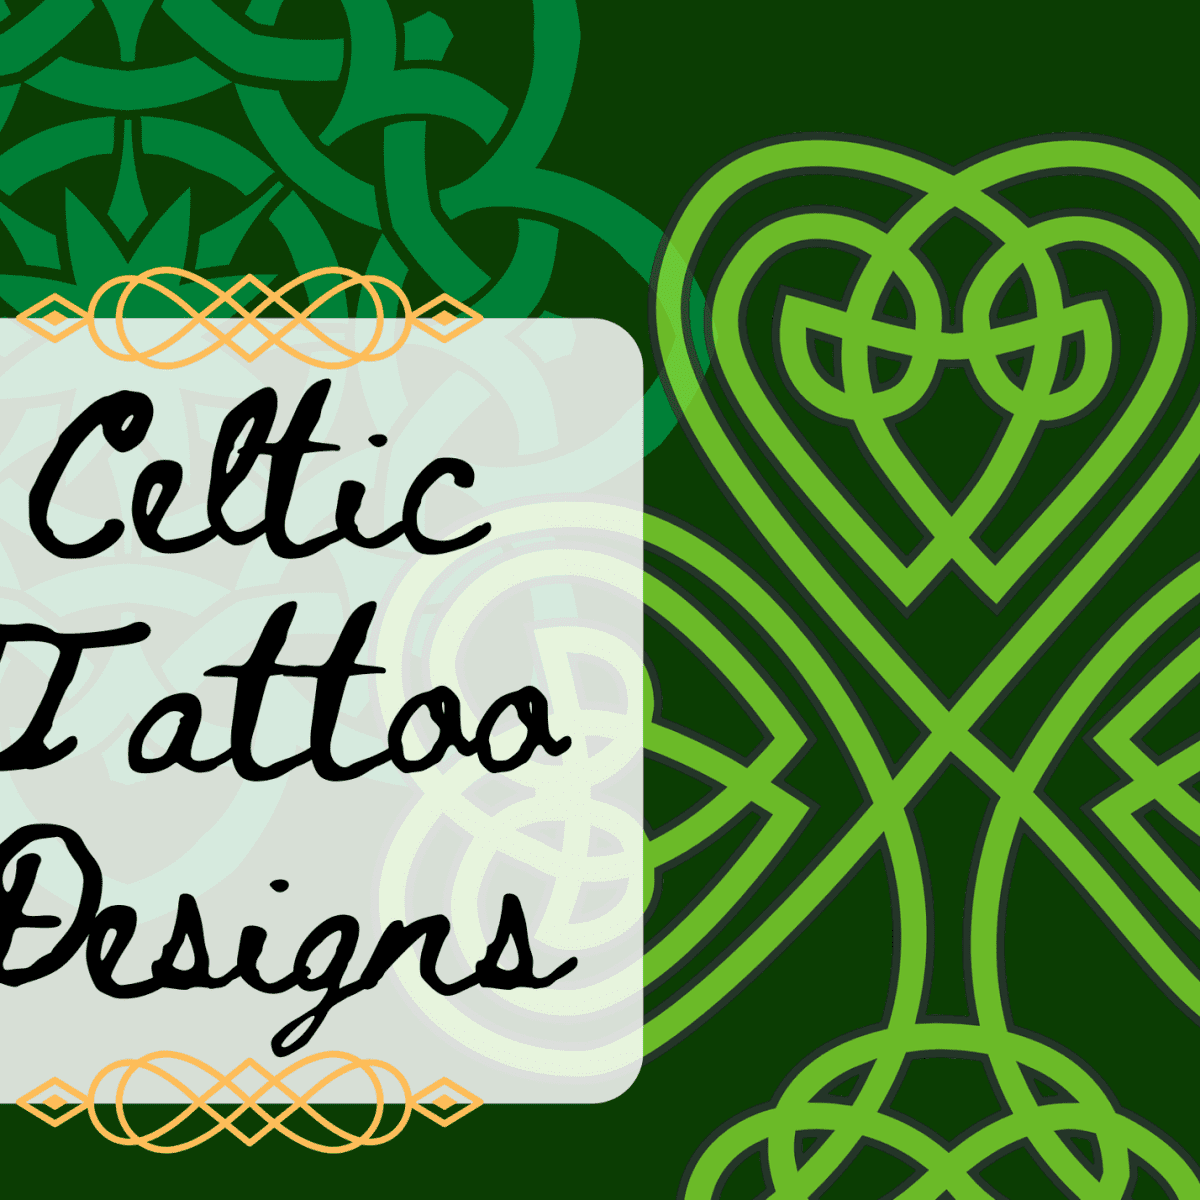 Celtic Tattoo Photos and Meanings: Knot and Cross Designs - TatRing